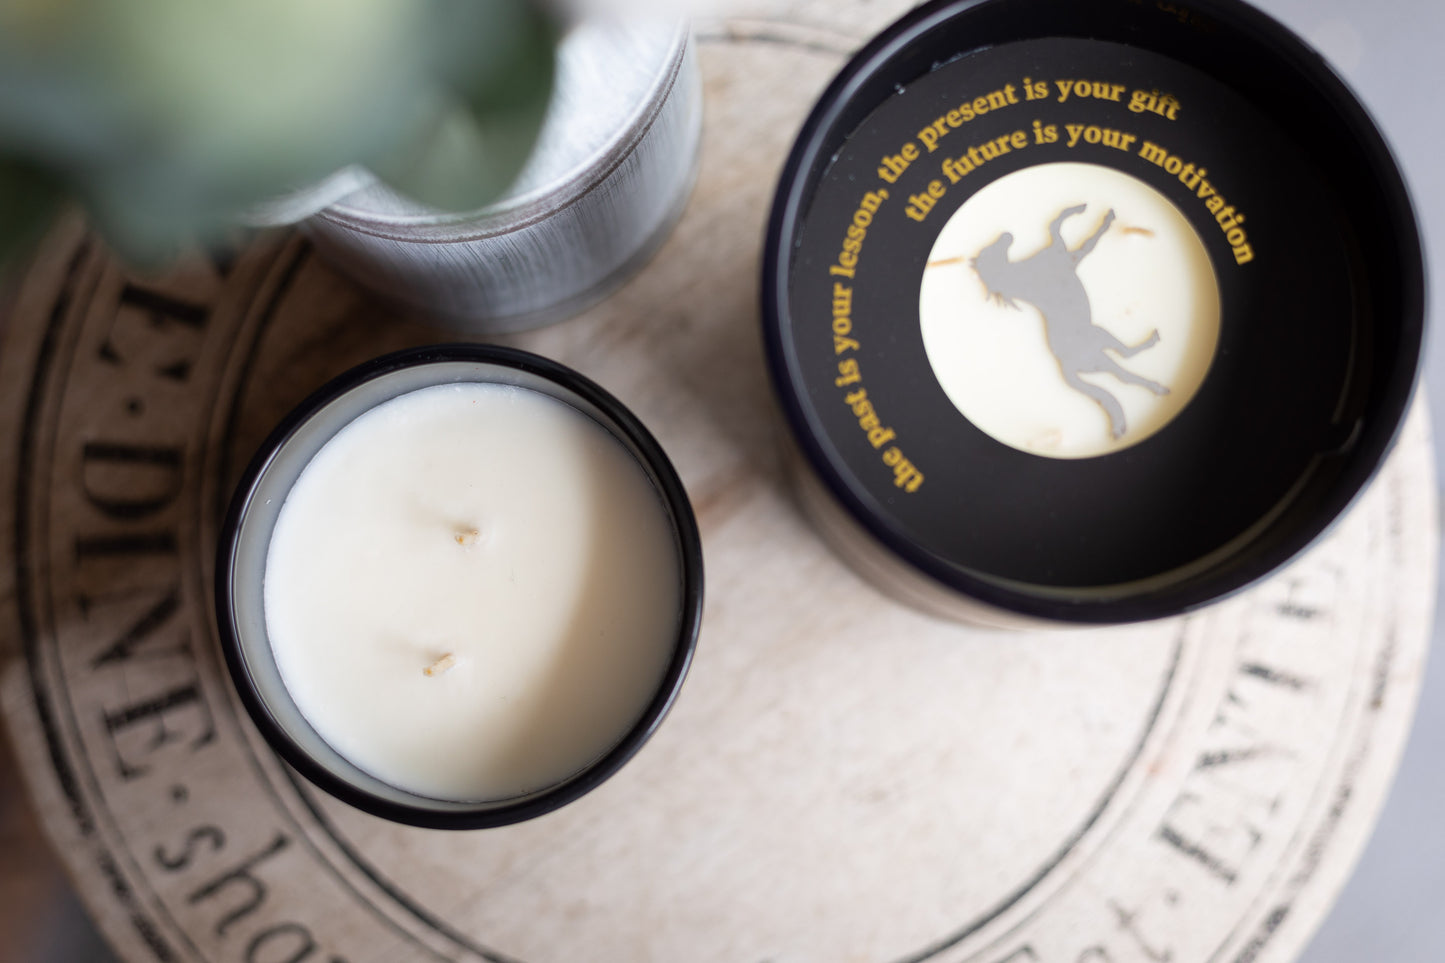 Horse Themed Candle